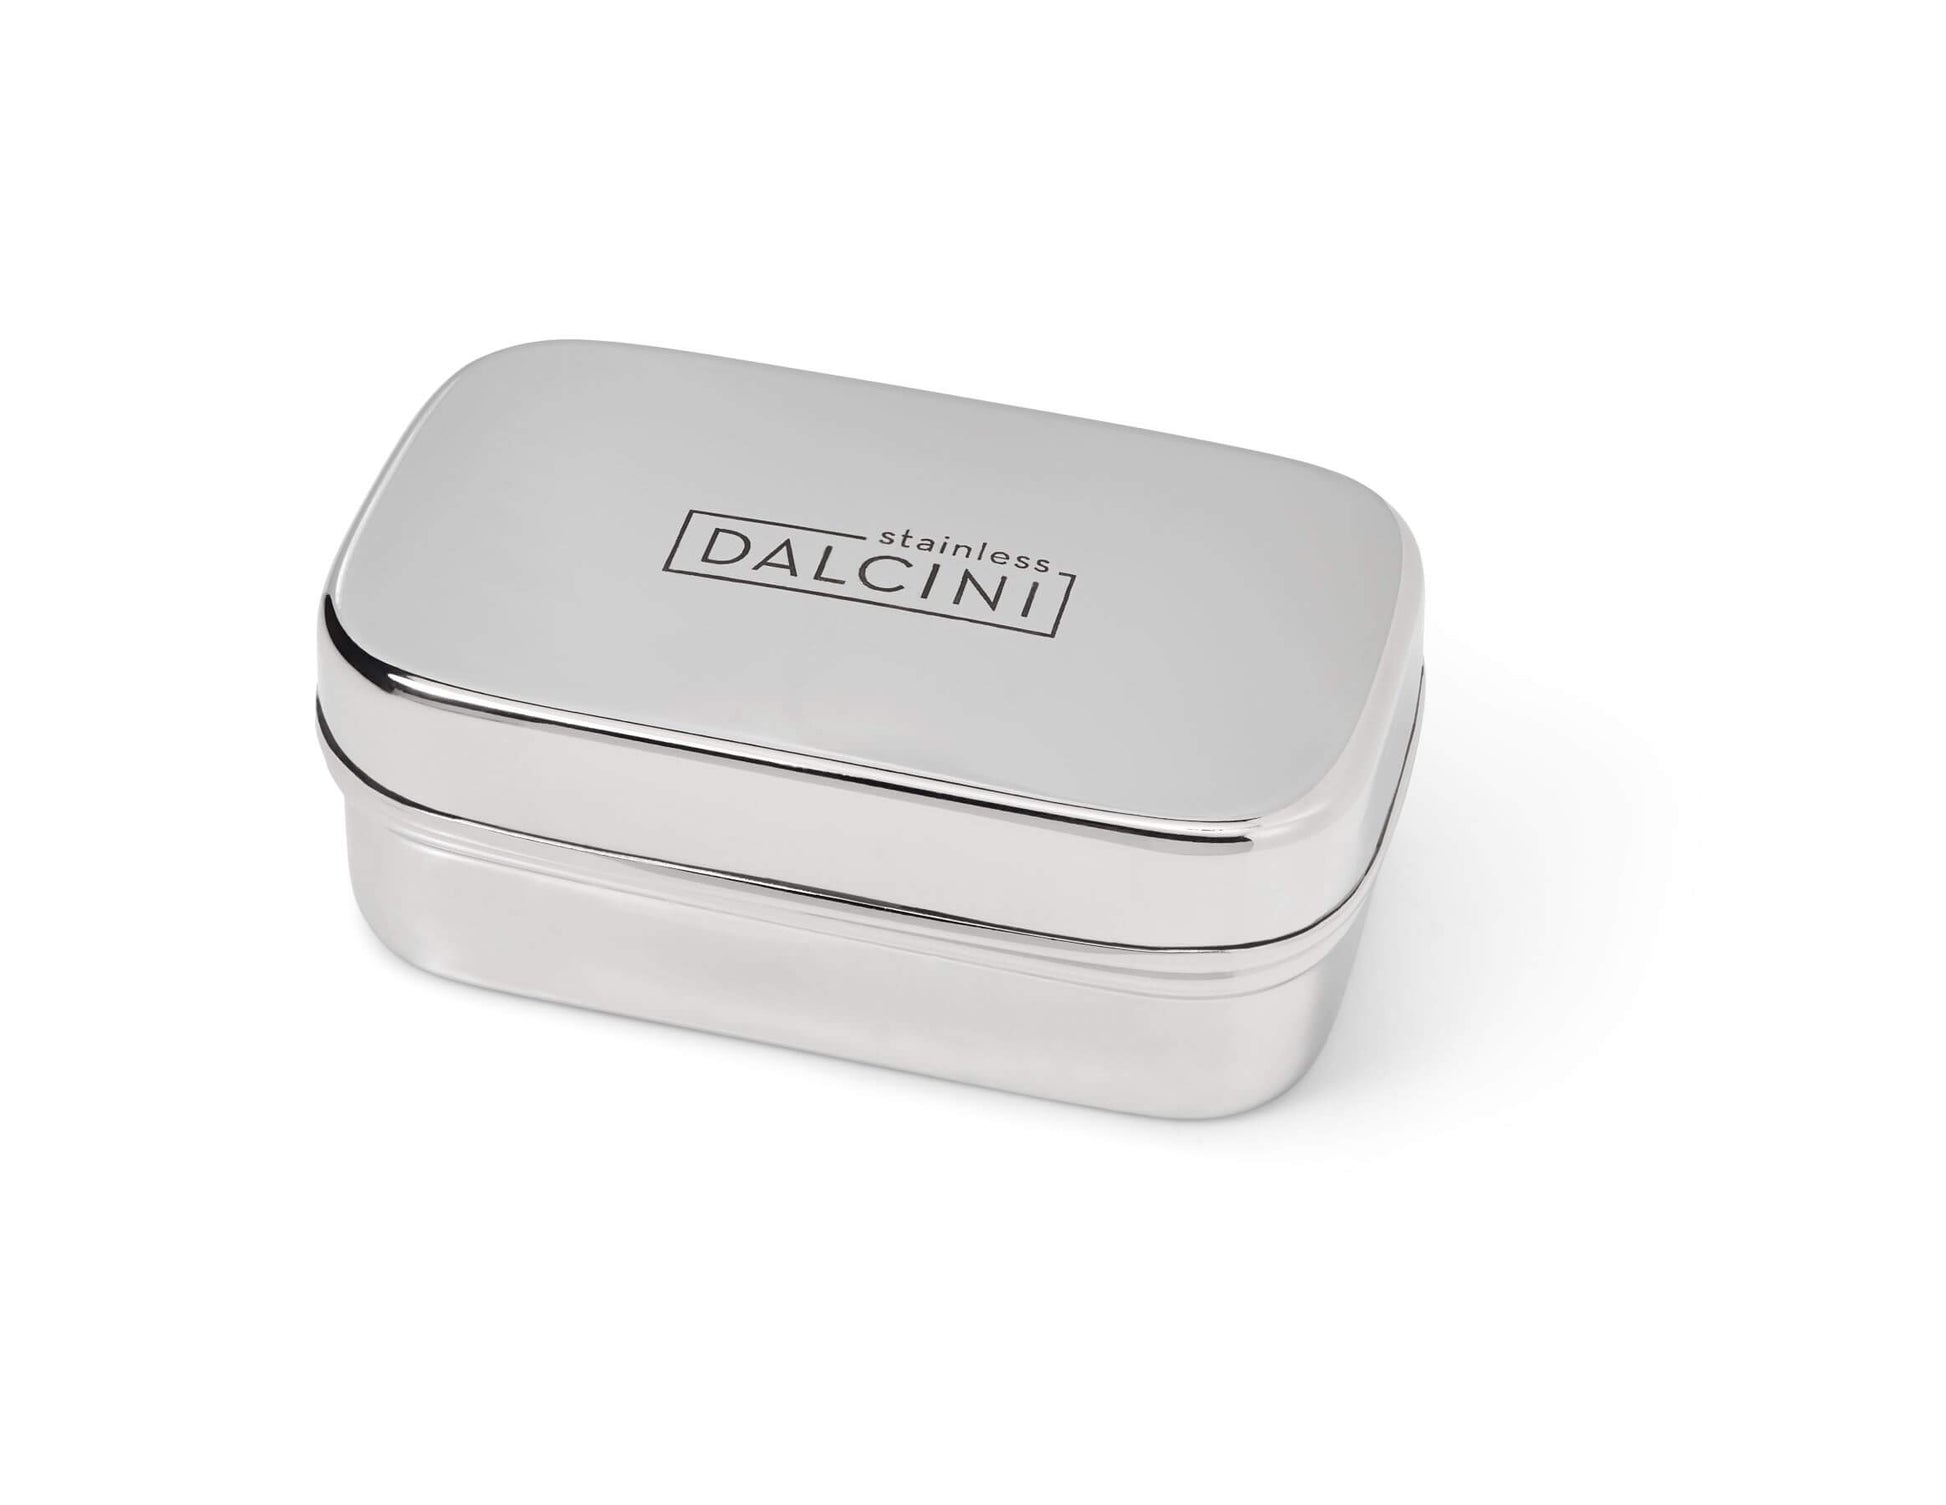 Closed food-grade stainless steel soap dish with Dalcini written on lid